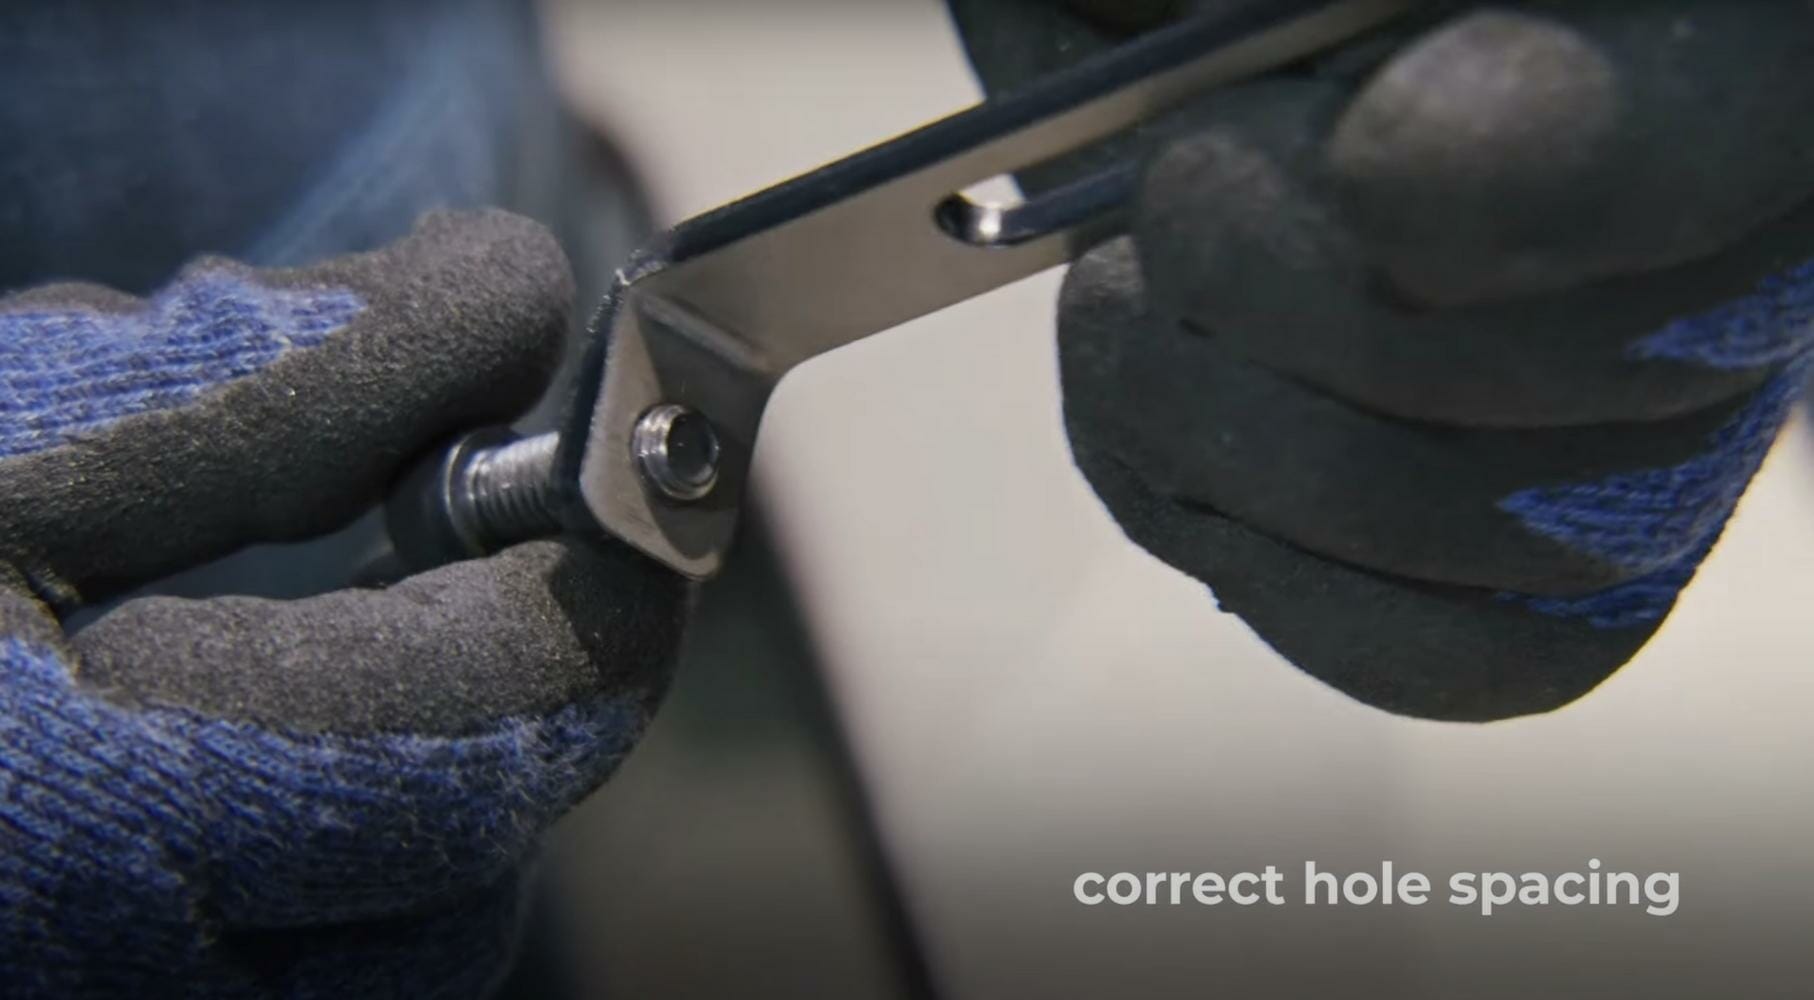 Screenshot from the video of a similar bent part with the hole spaced far enough away from the die line as to not compromise the feature. This is denoted with "correct hole spacing" written in the bottom right corner